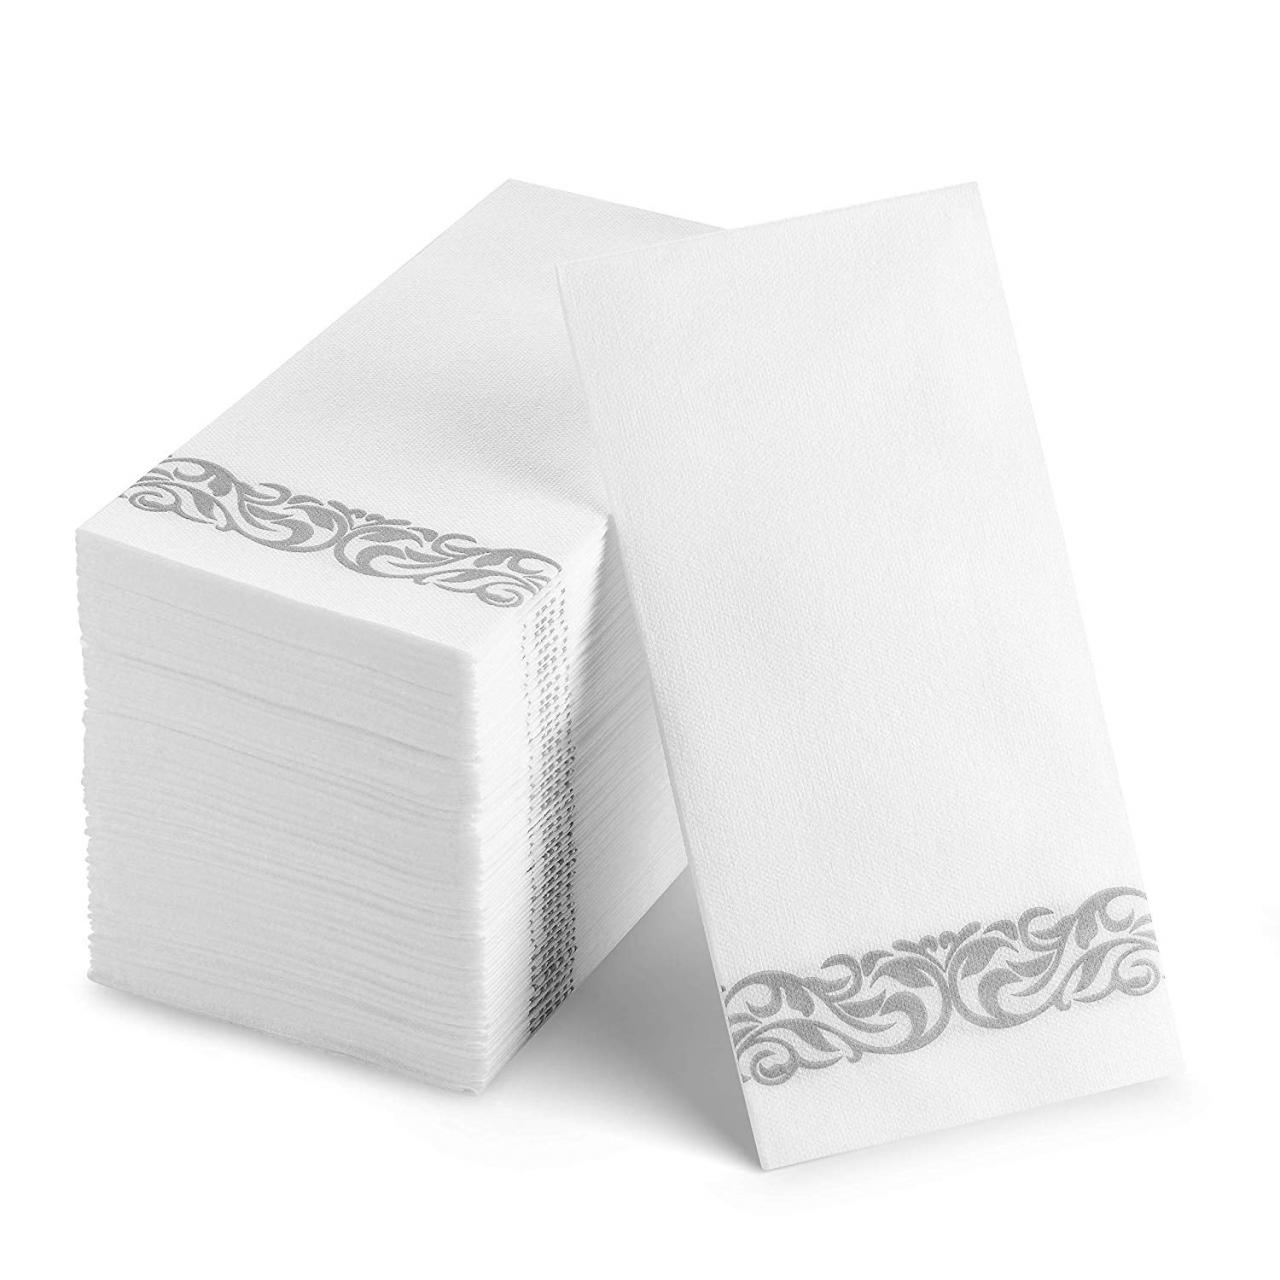 100 Disposable Guest Towels Soft and Absorbent LinenFeel Paper Hand